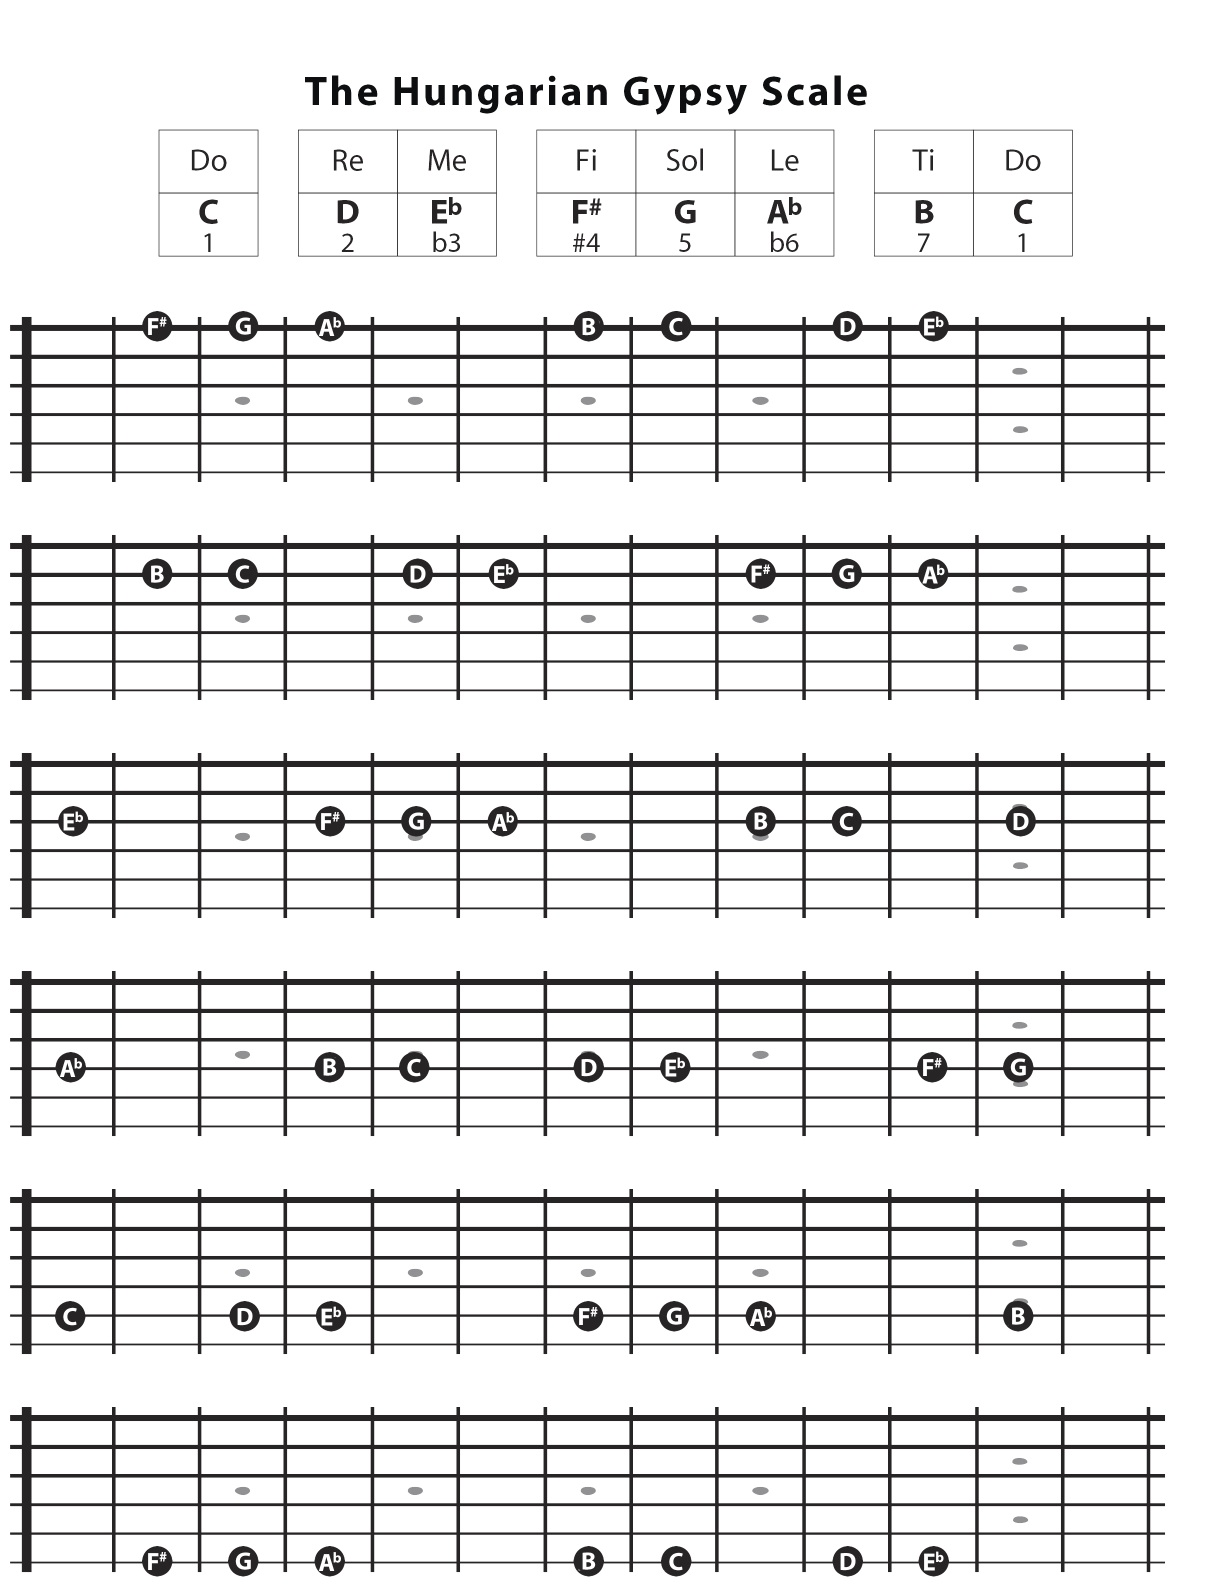 The C Hungarian Gypsy scale mapped out linearly on each single string